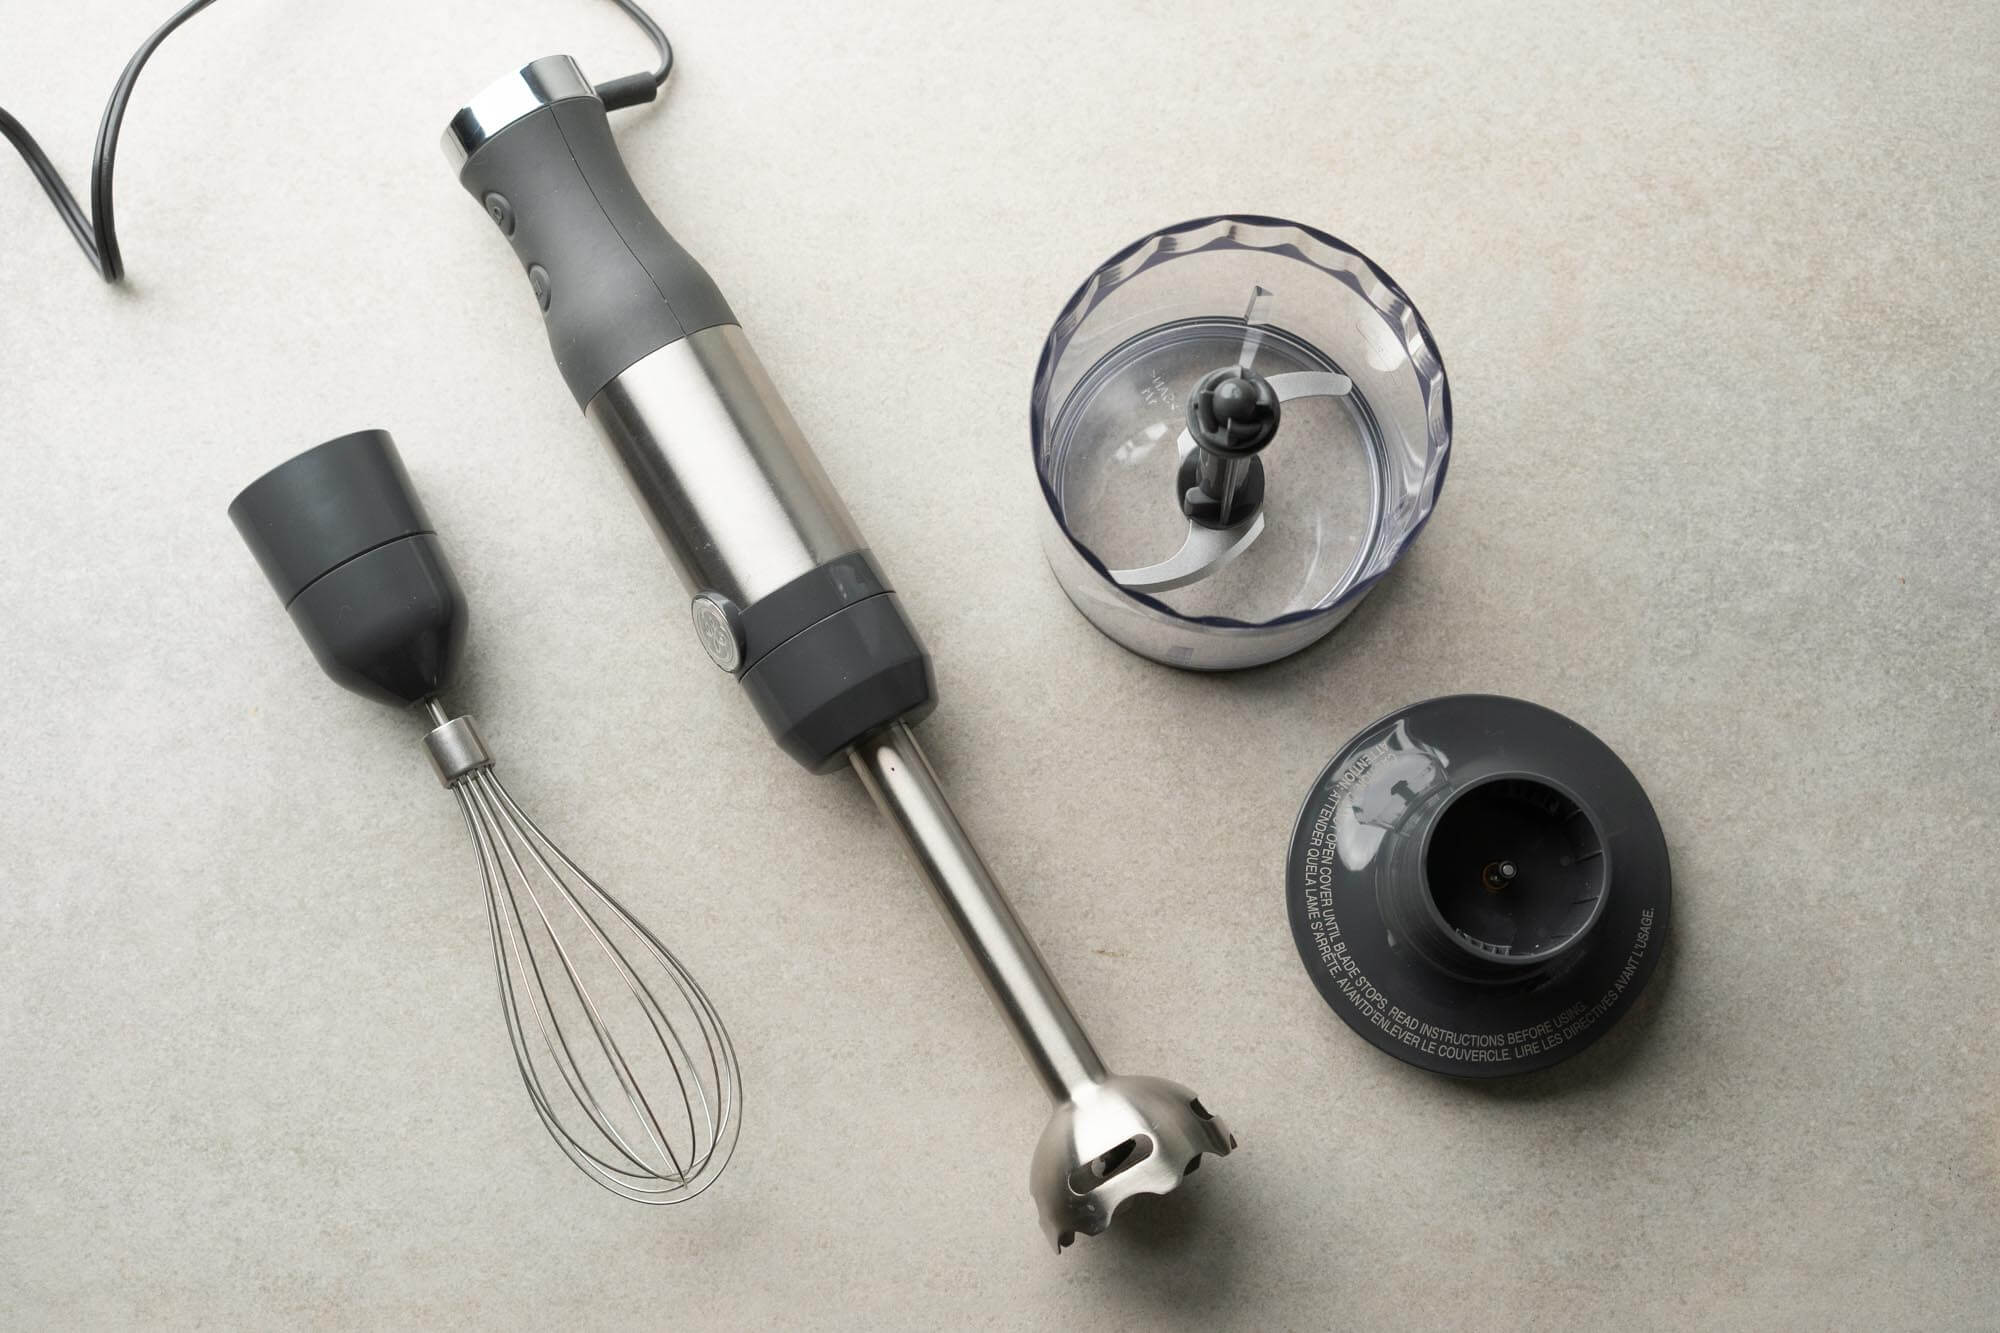 Hand Mixer vs Immersion Blender: What's the Difference?